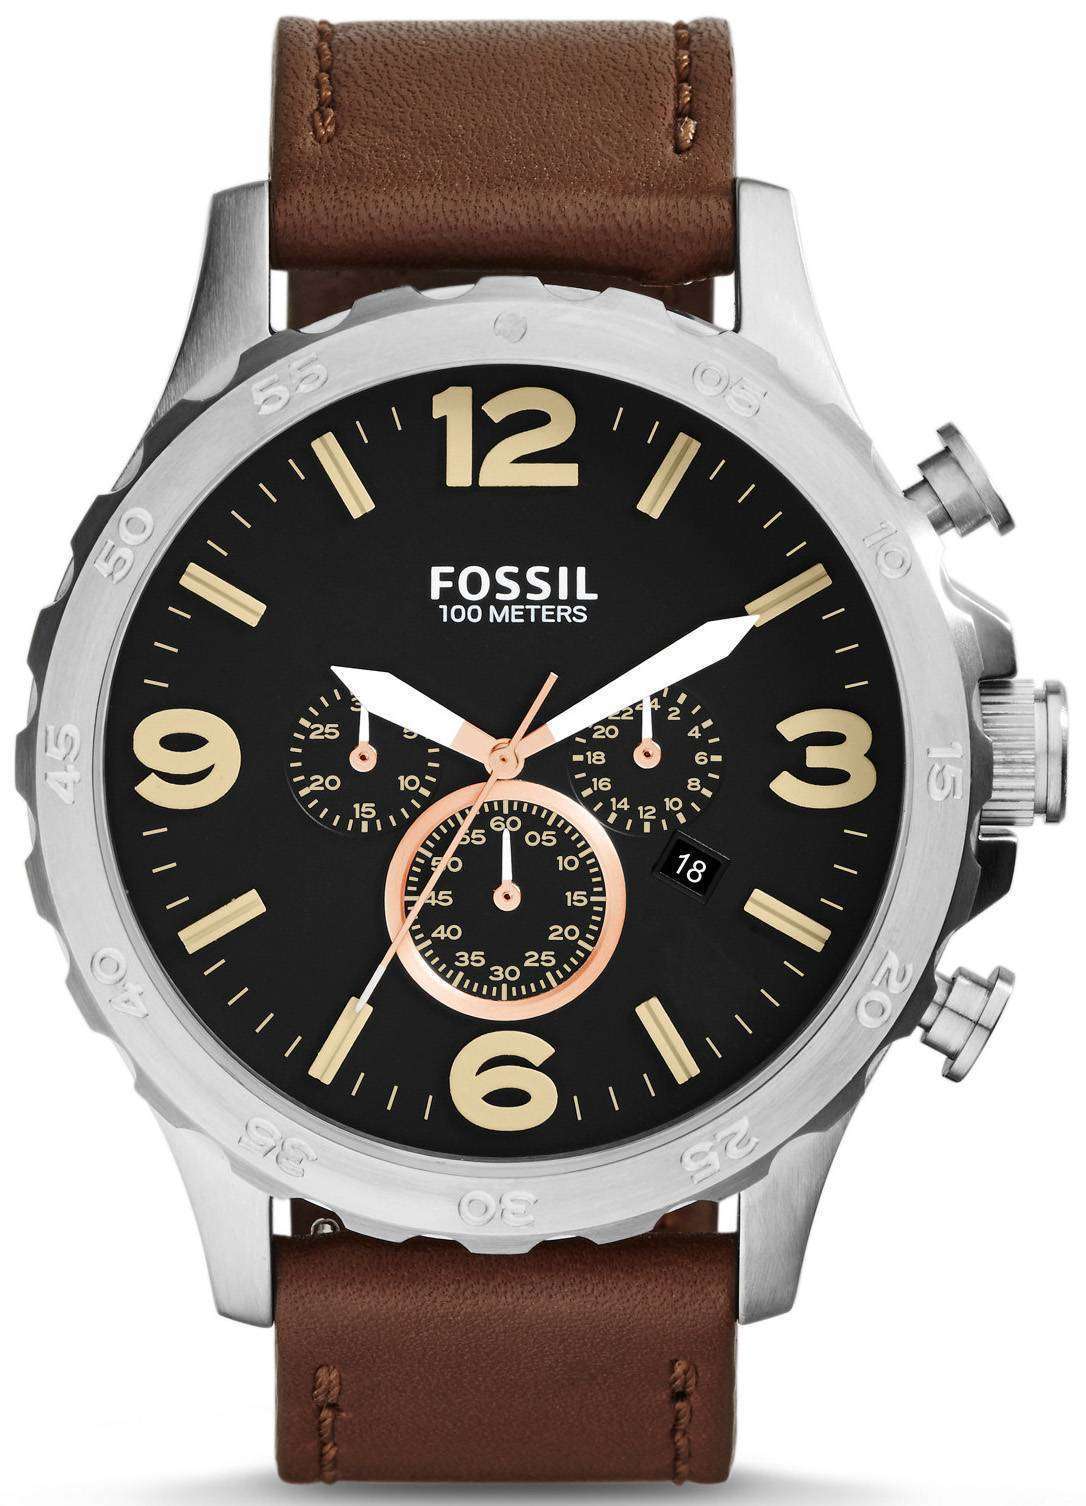 Fossil Nate Chronograph Black Dial JR1475 Men's Watch - CityWatches.co.uk